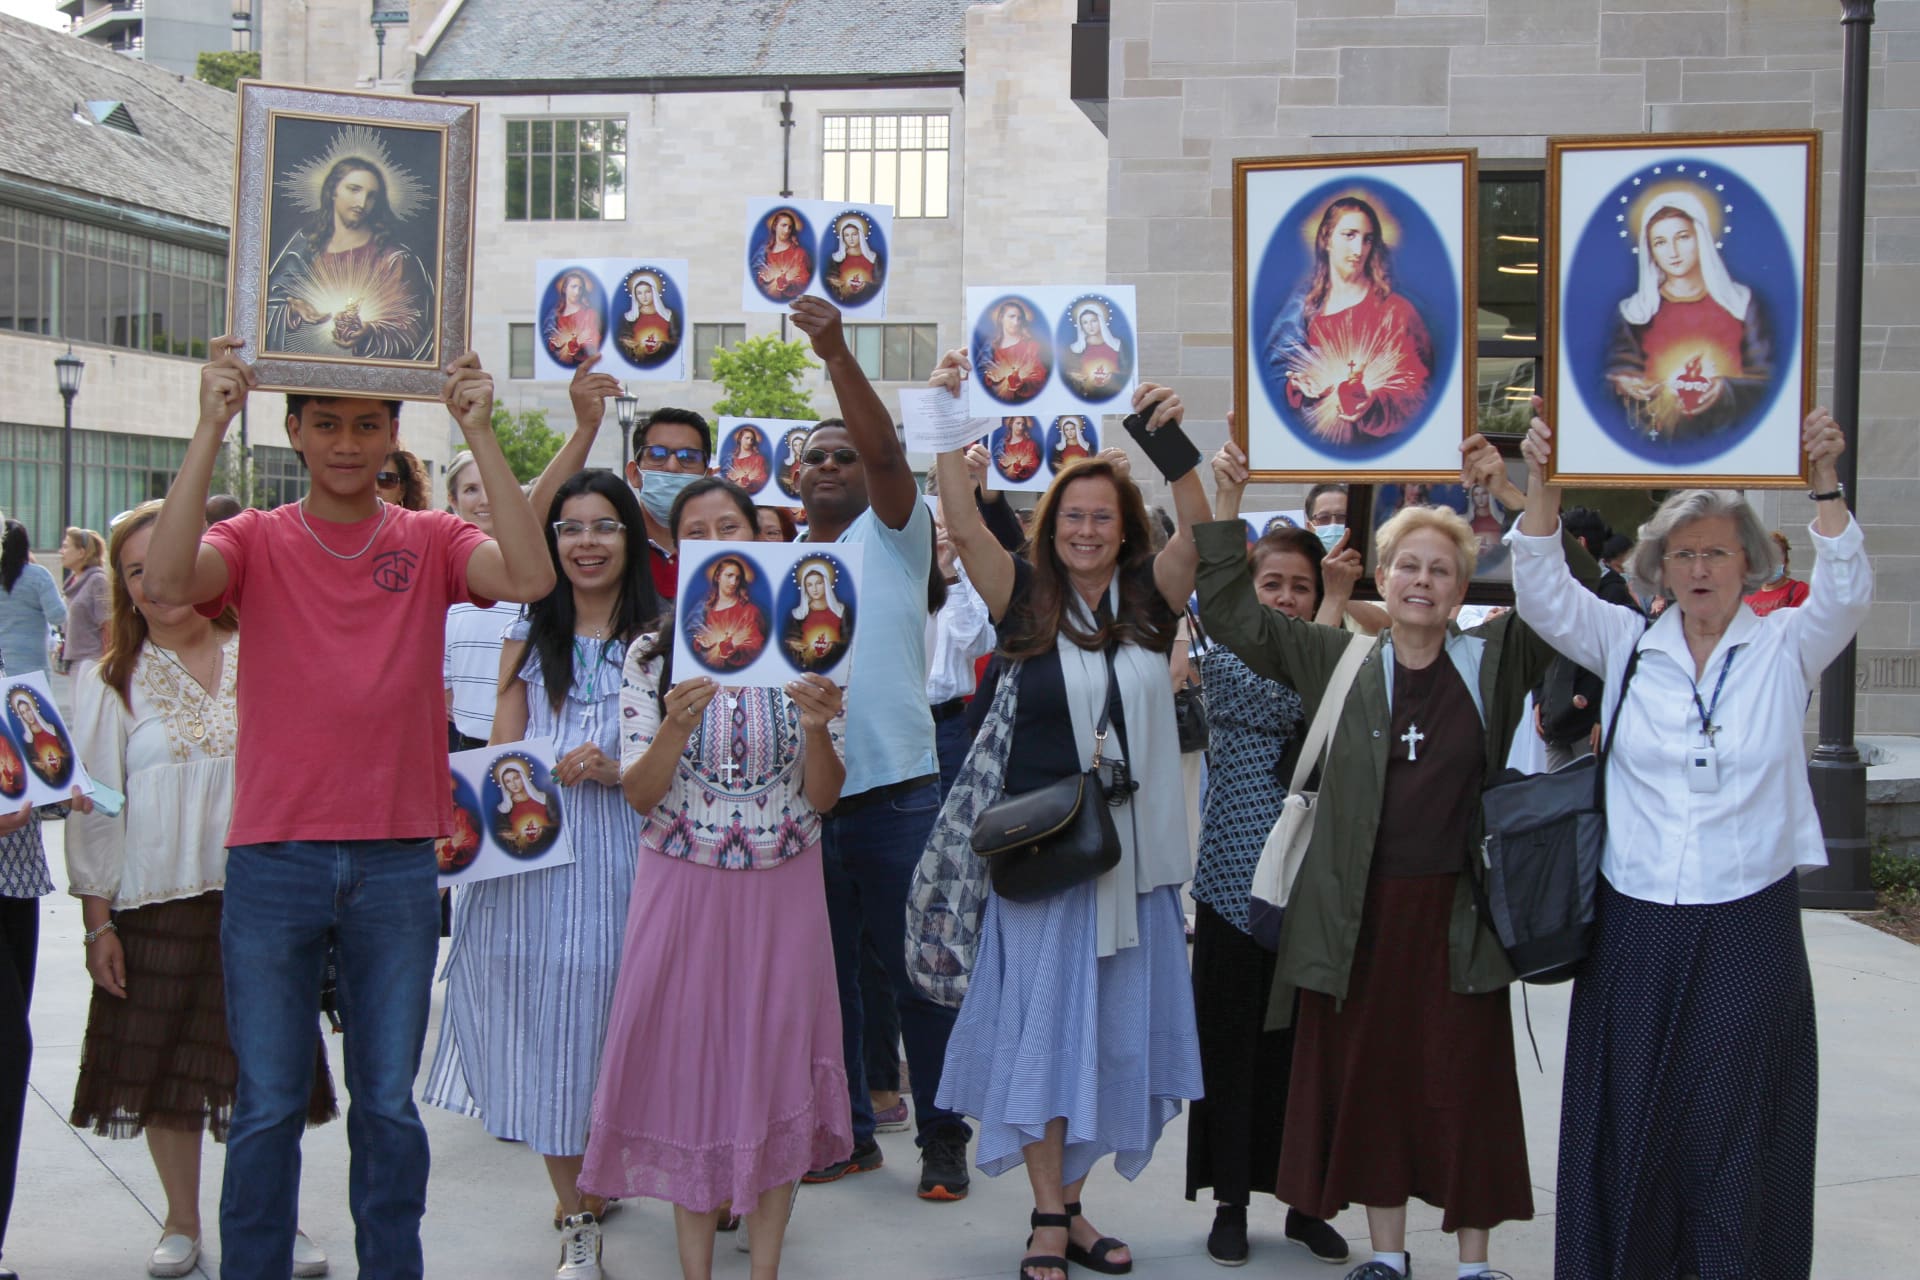 Enthusiastic members of the Cathedral of Christ the King and its mission prepare for the June 2 eucharistic procession and Holy Hour, which started from the Hyland Center courtyard and made its way into the sanctuary.Photo by David Pace